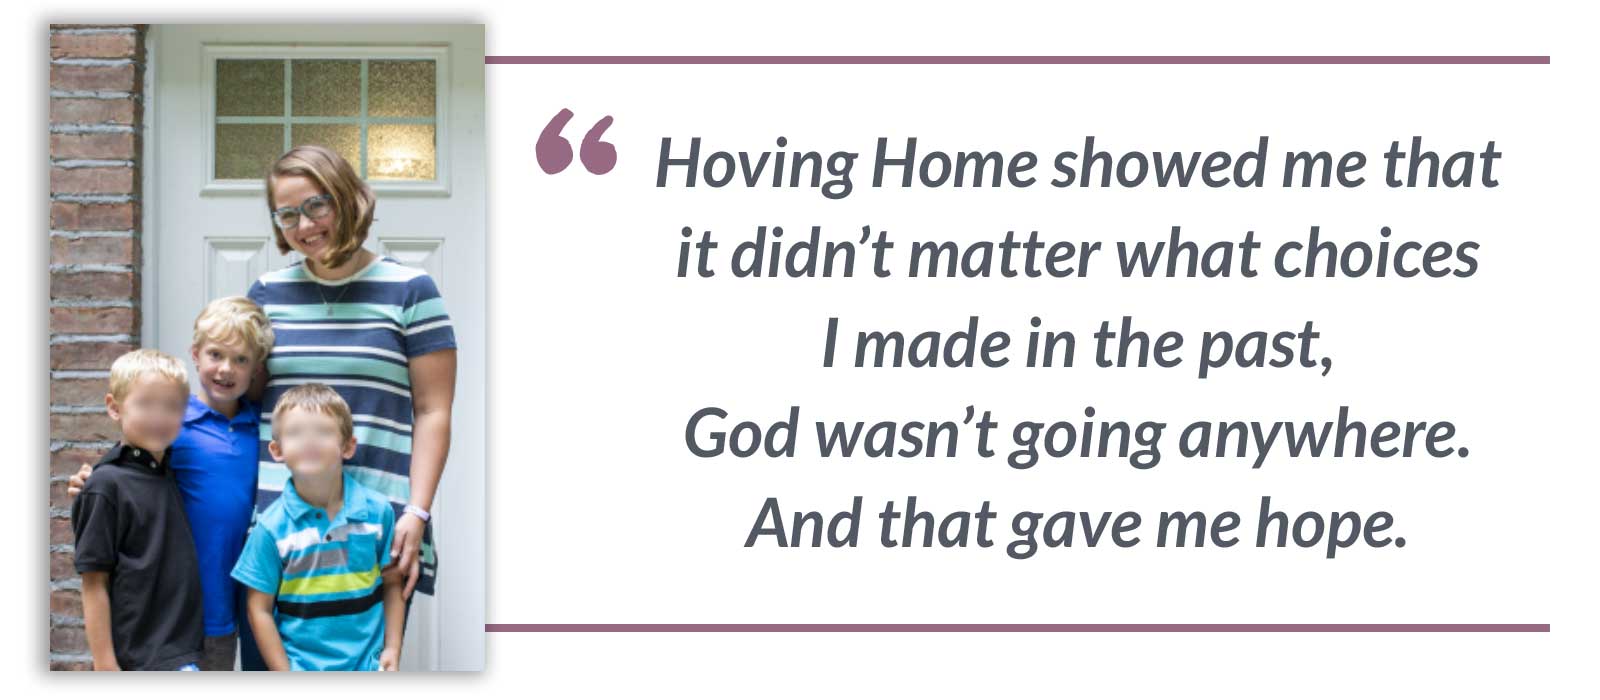 Hoving Home showed me that it didn’t matter what choices I made in the past, God wasn’t going anywhere. And that gave me hope.-Maria